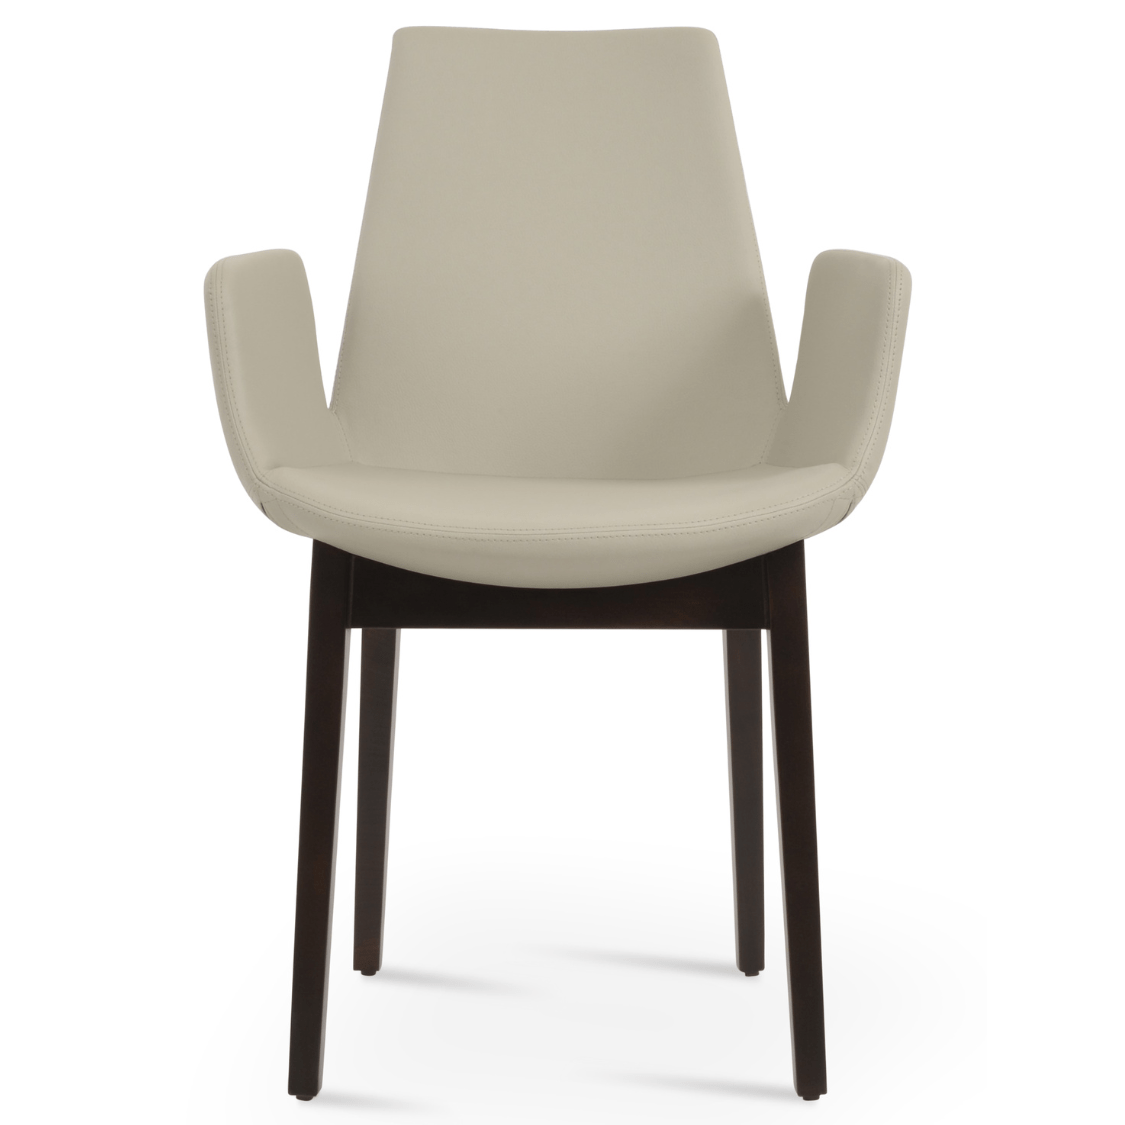 Leather Dining Chairs Eiffel Arm Cream - Your Bar Stools Canada